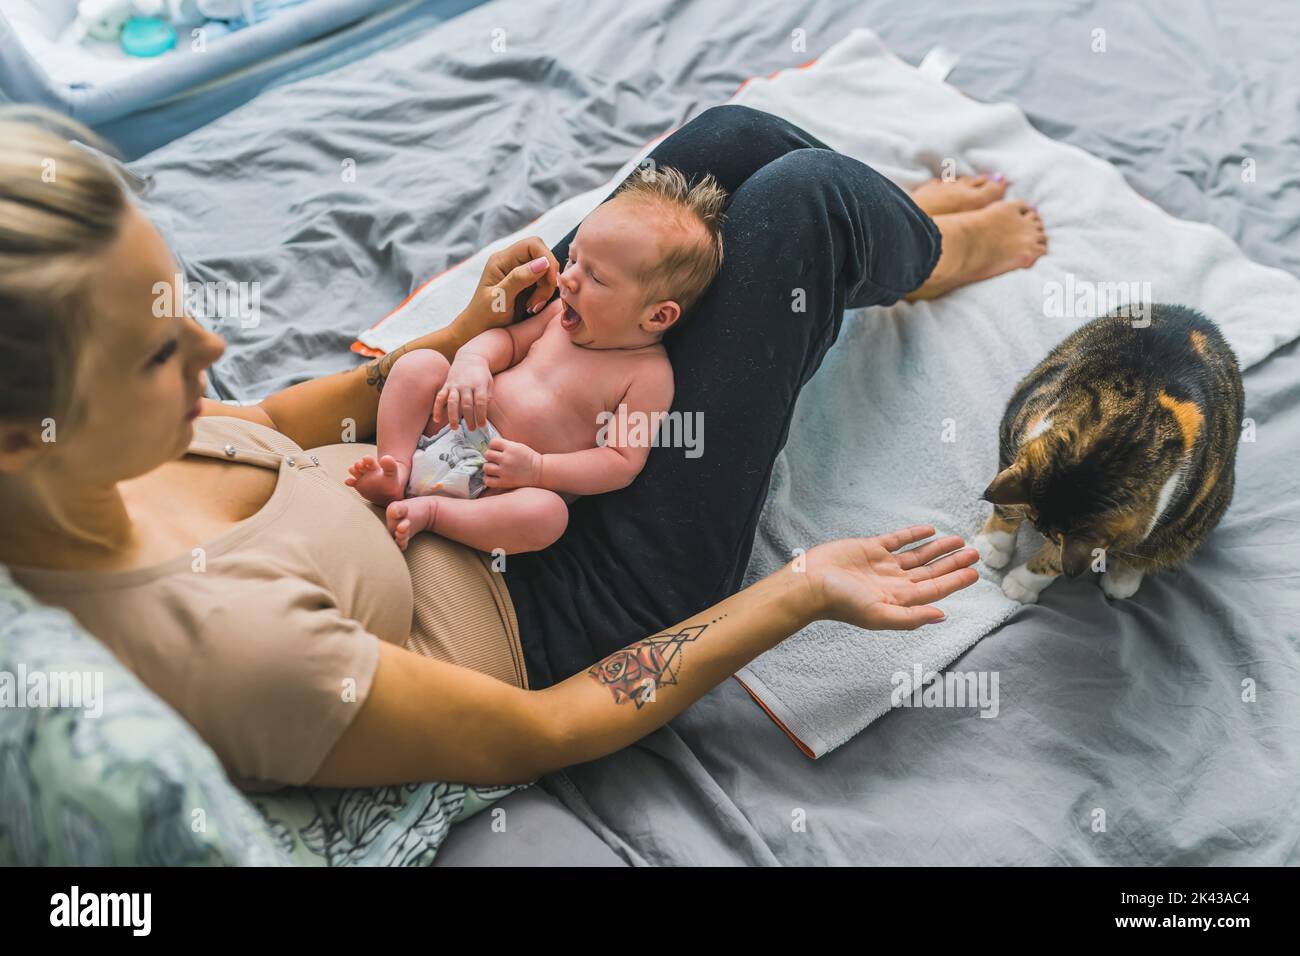 Young mother holding her newborn son on her lap, who is wearing a diaper and yawning. Big multicolored cat sitting near them and a woman trying to pet him. High quality photo Stock Photo